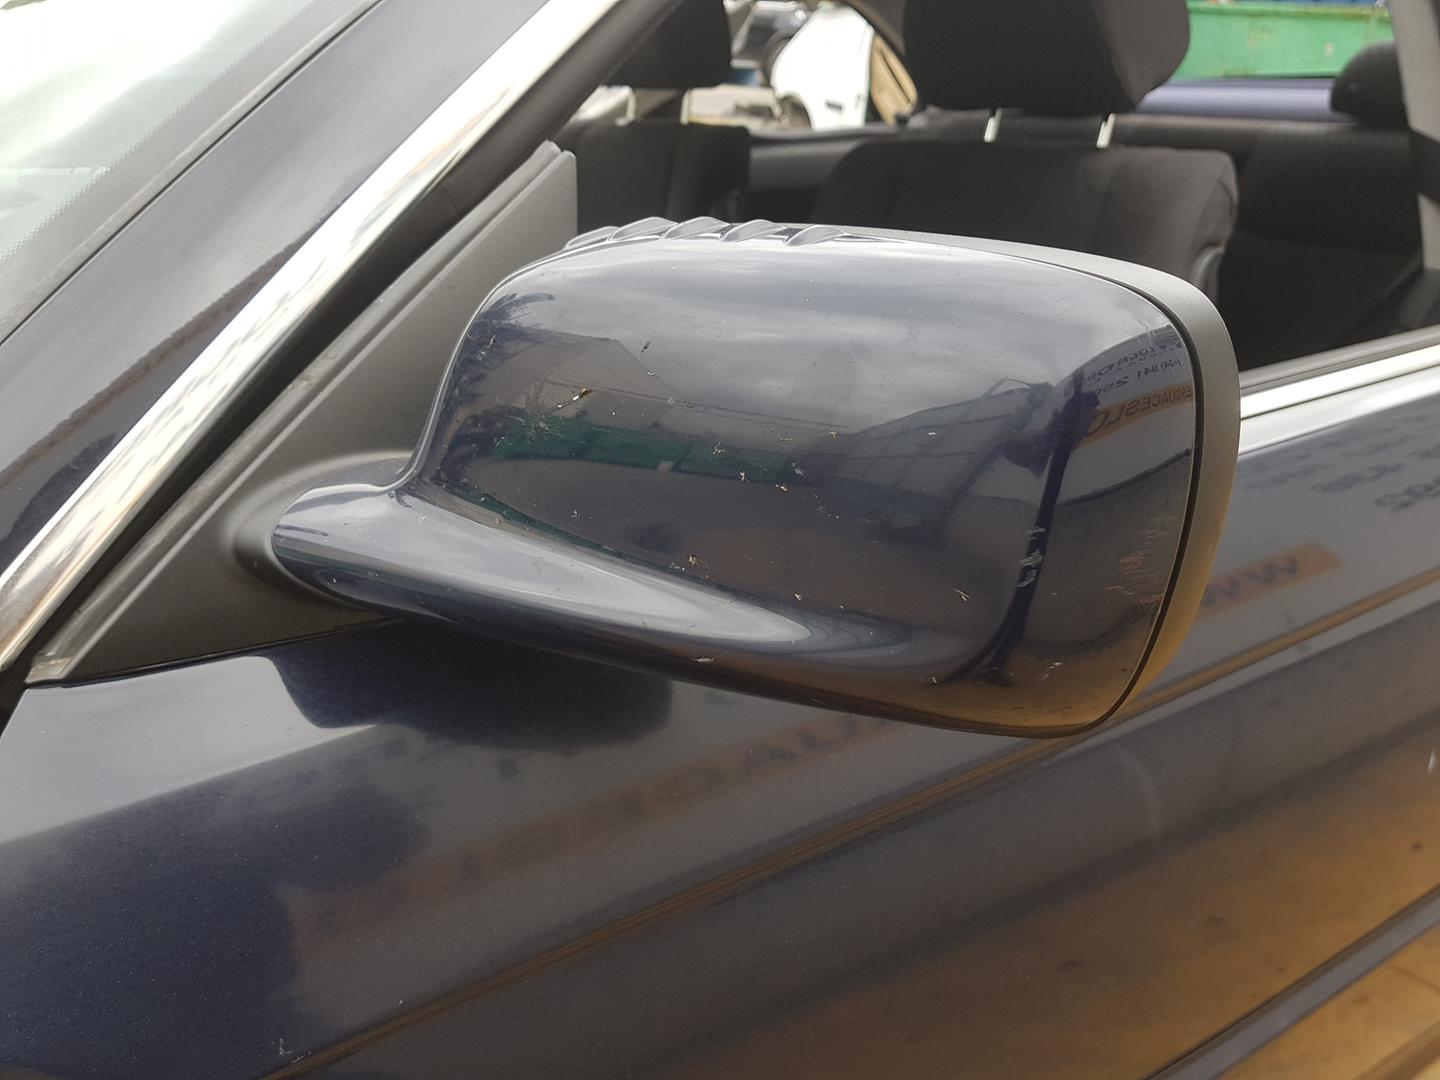 BMW 3 Series E46 (1997-2006) Other Interior Parts 63318364929, 8364929 19872792